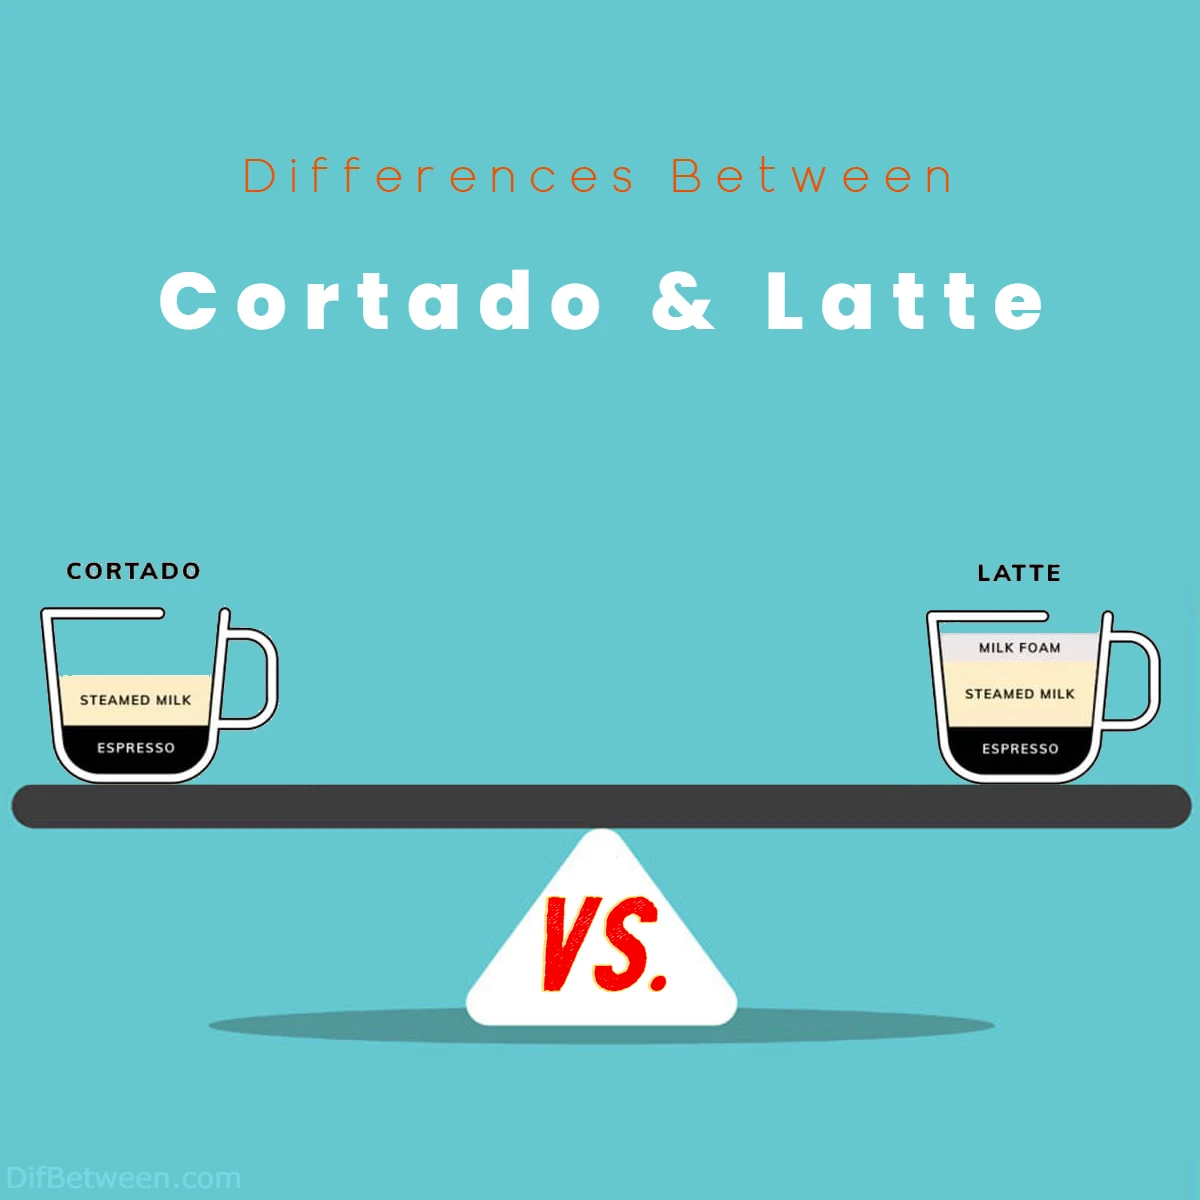 Differences Between Latte and Cortado